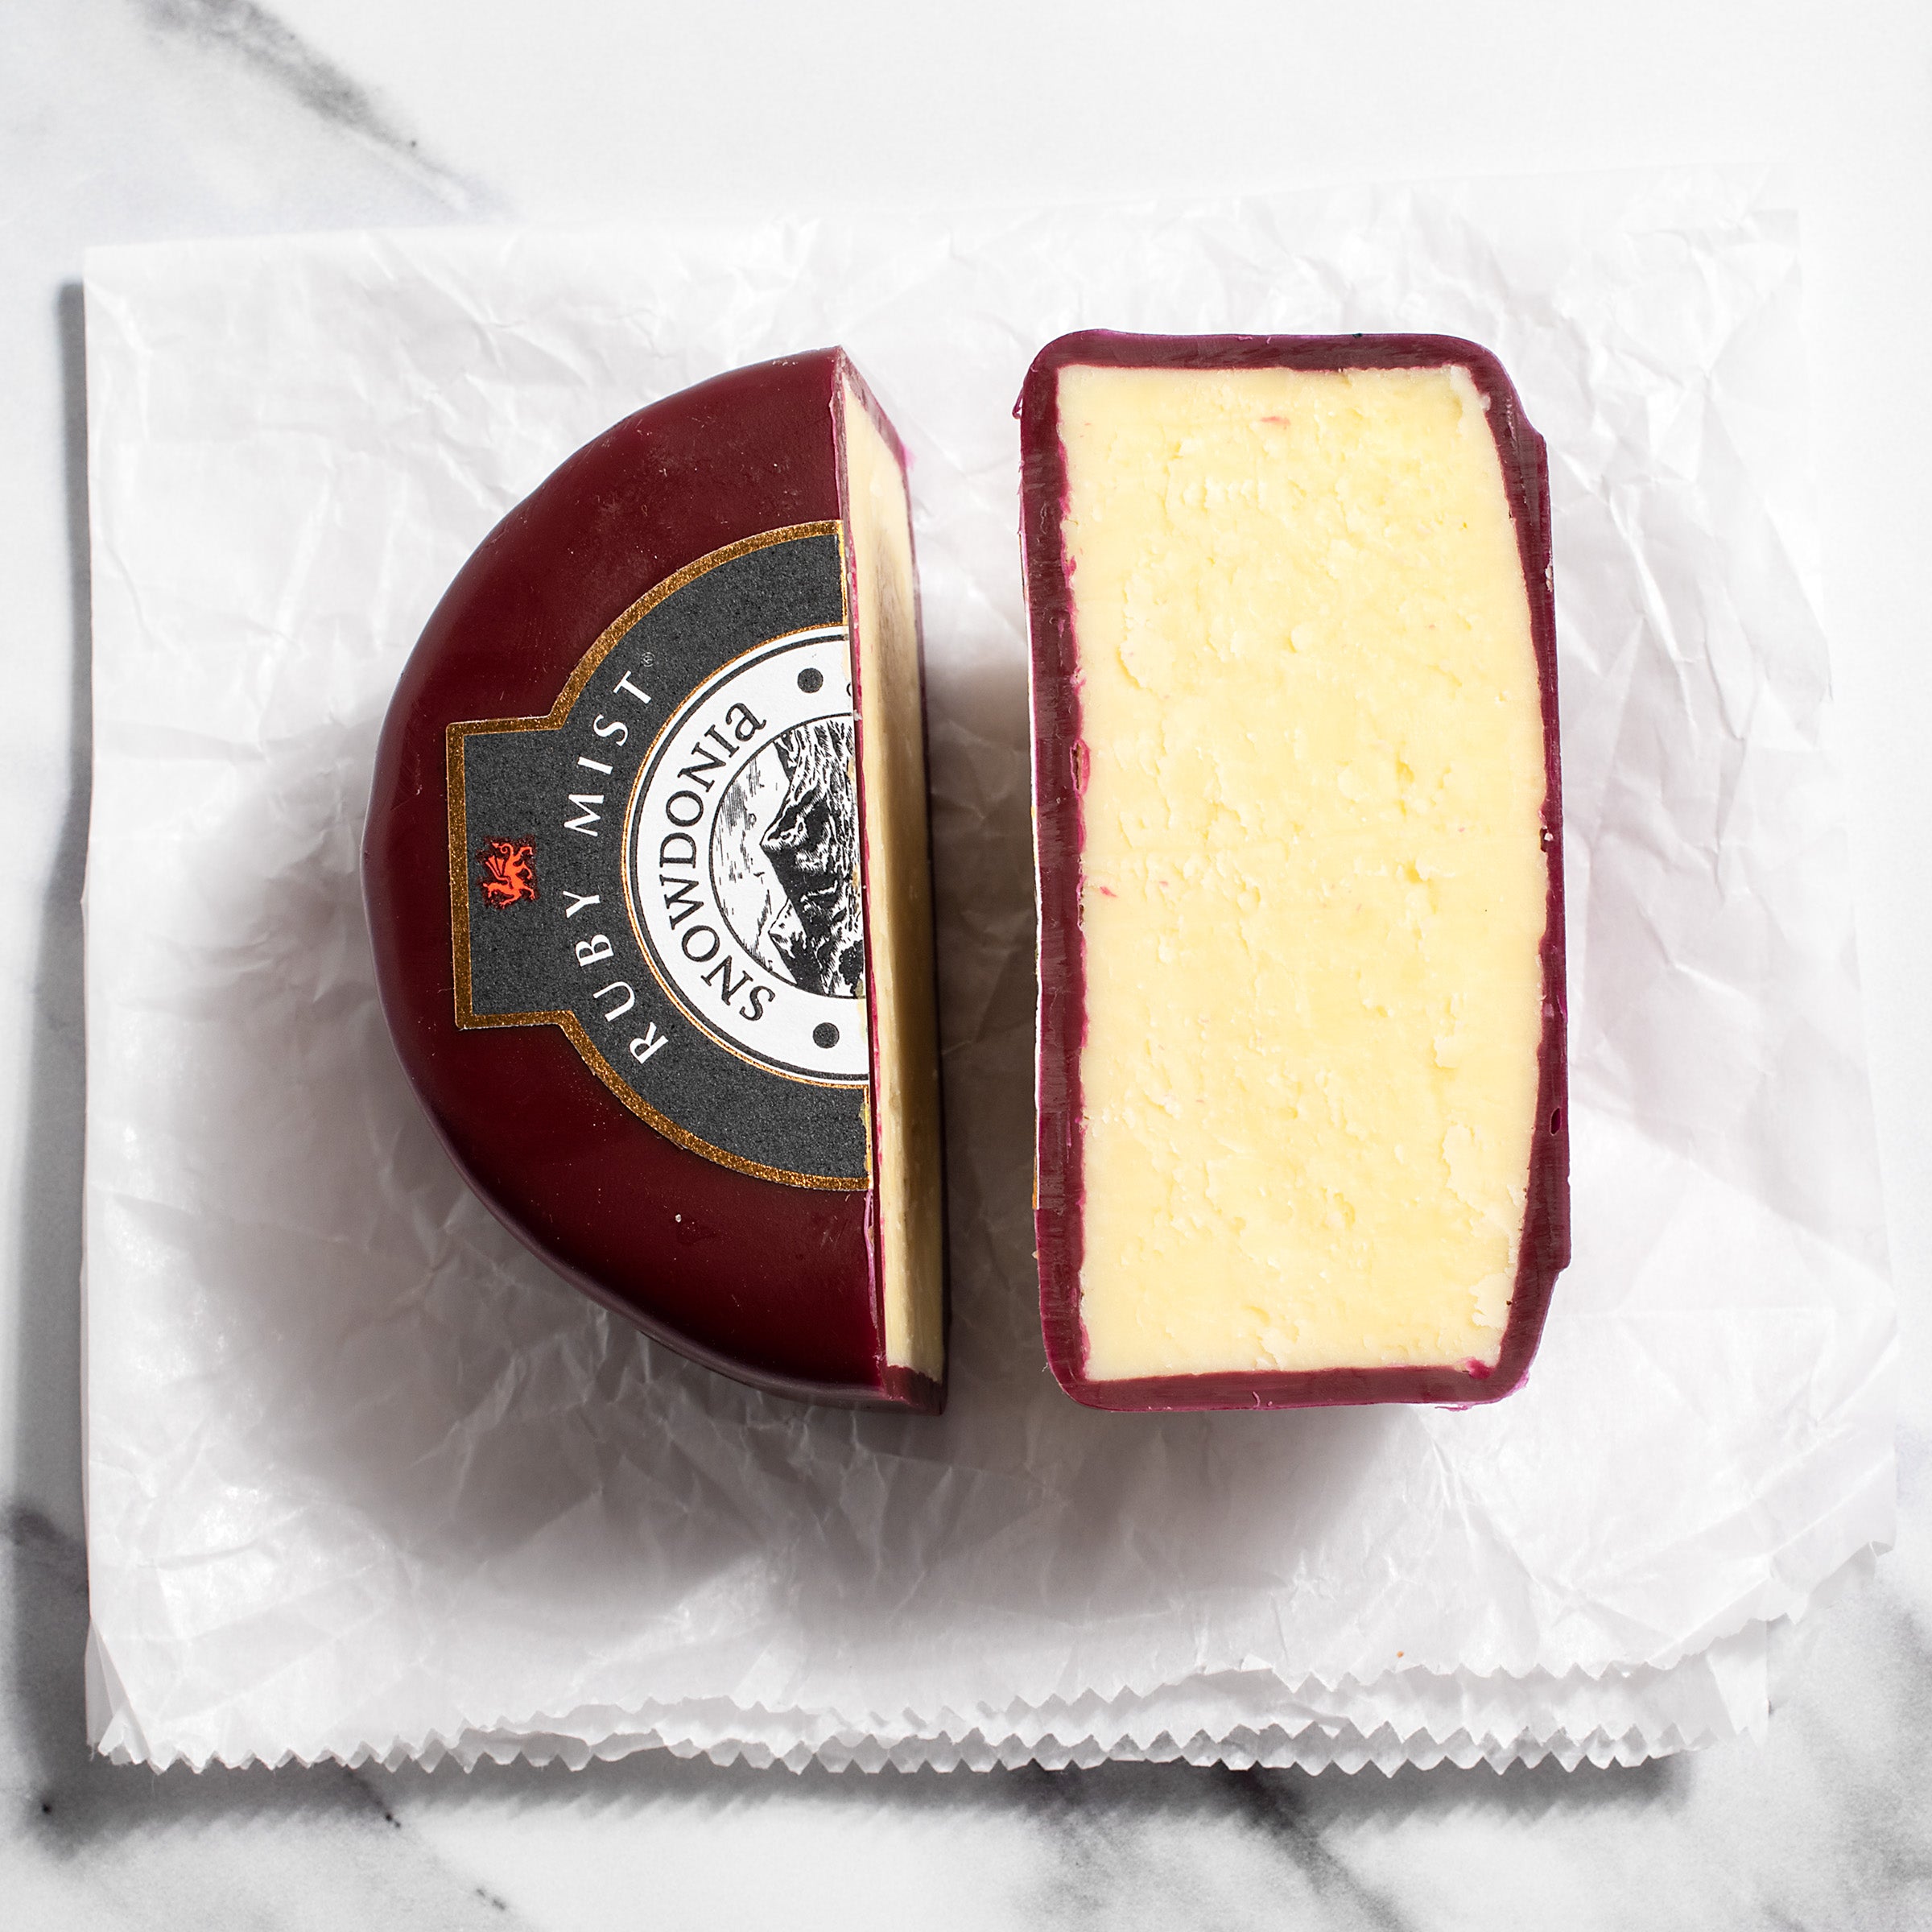 igourmet_2449-1_Ruby Mist Welsh Truckle Cheese - Mature Cheddar with Port and Brandy_Snowdonia_Cheese